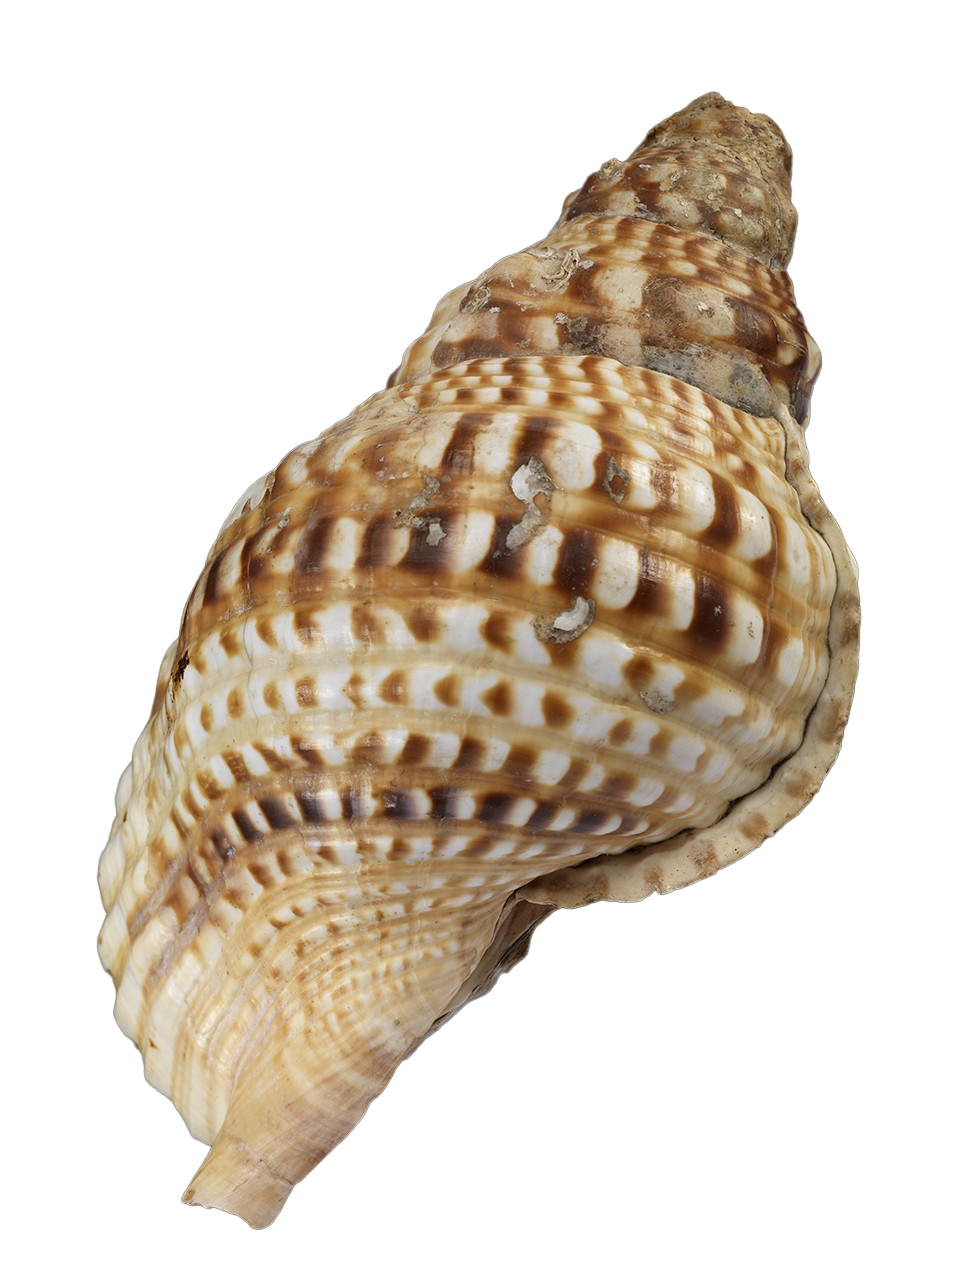 Sea Conch Shell PNG Image Transparent Background